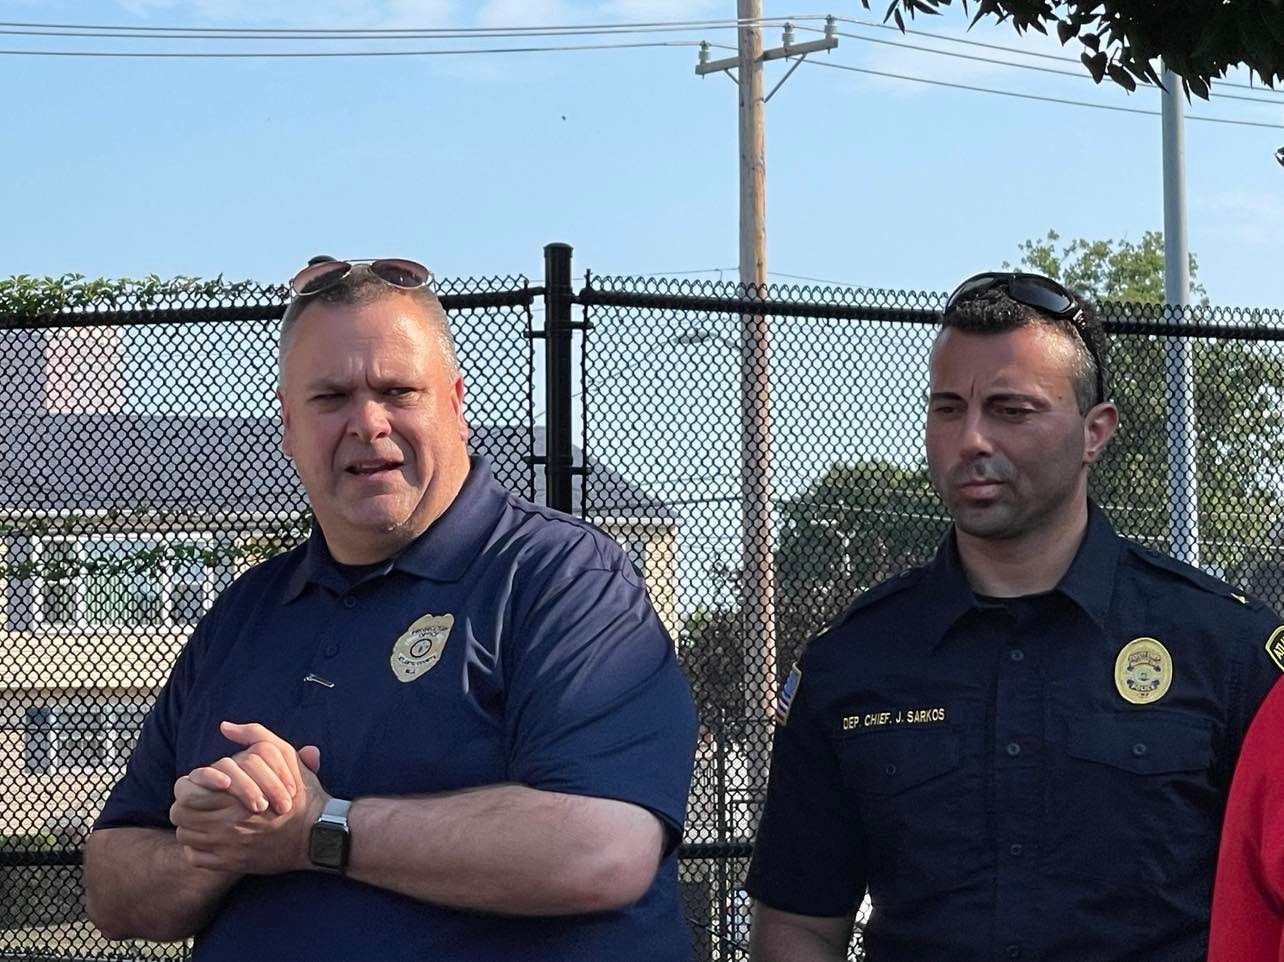 Atlantic County Prosecutor William E. Reynolds (Left) and Acting Atlantic City Police Chief James A. Sarkos (Right)Photo credit: Mark Tyler